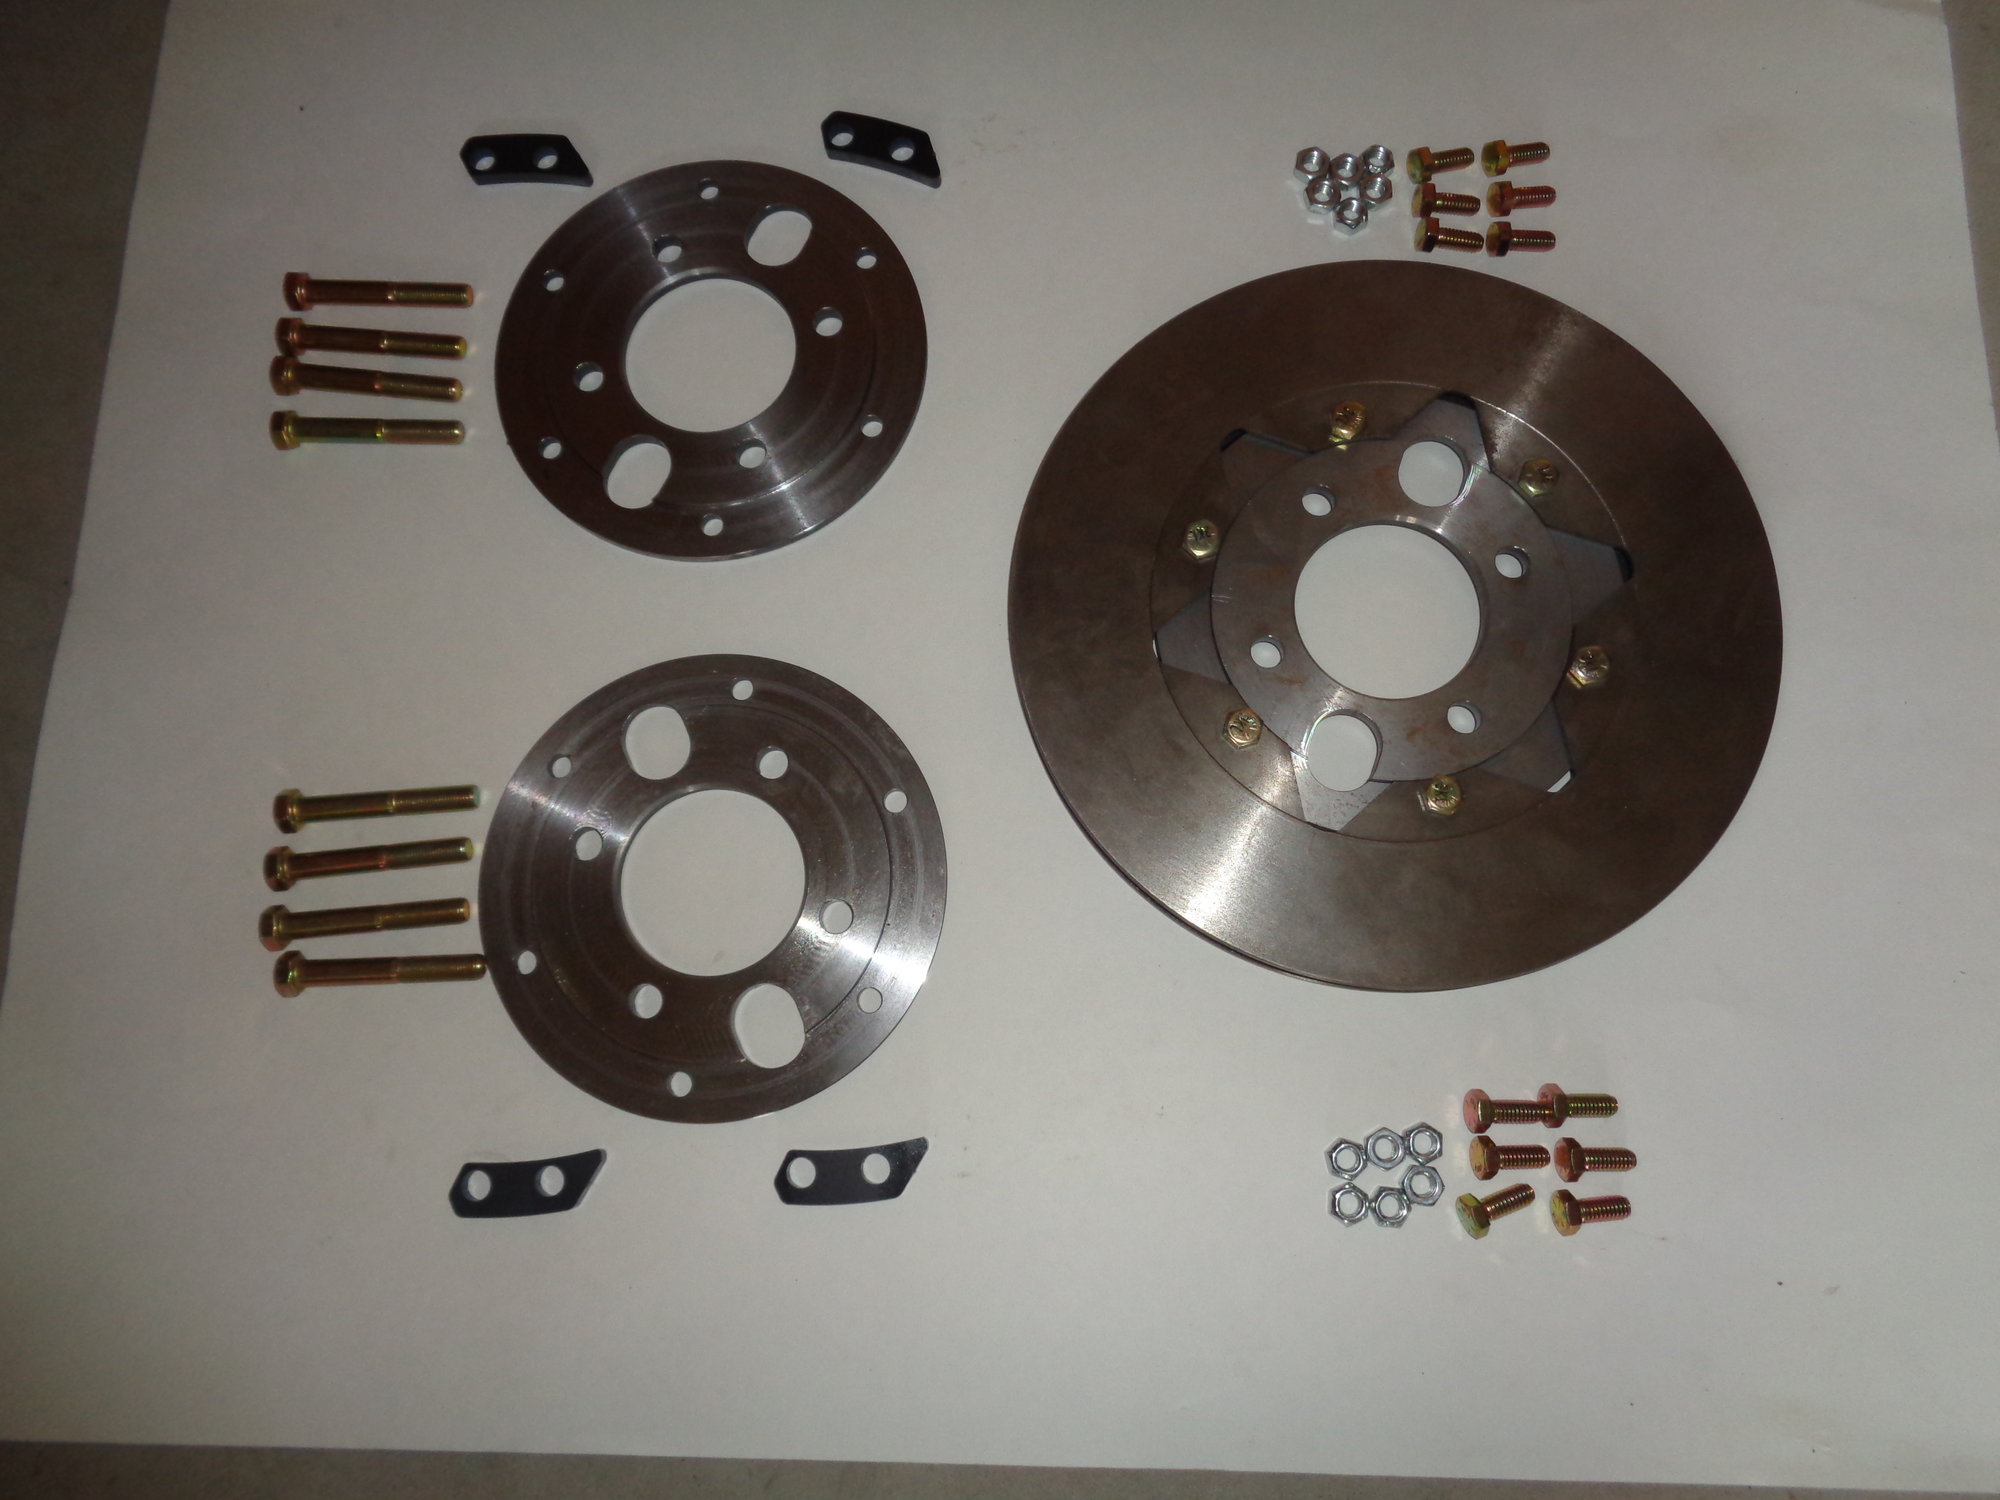 Brakes - Vented Rotor Kit for all Jaguar Diffs from MK X to Jag.diff. 1993 - New - 1964 to 1993 Jaguar Mark X - Fresno, CA 93711, United States